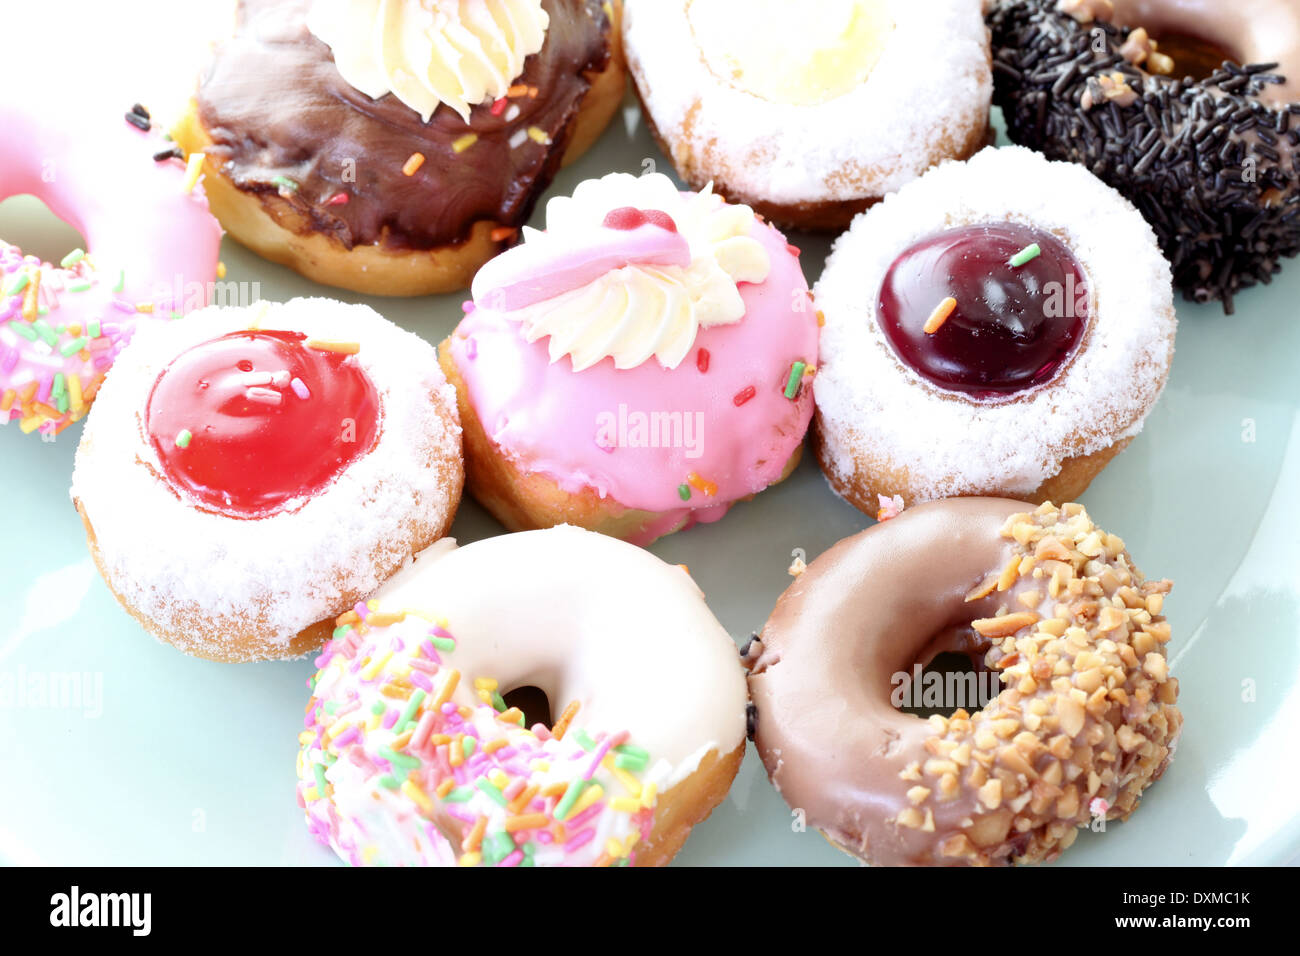 Many donuts in the dish with side by side. Stock Photo